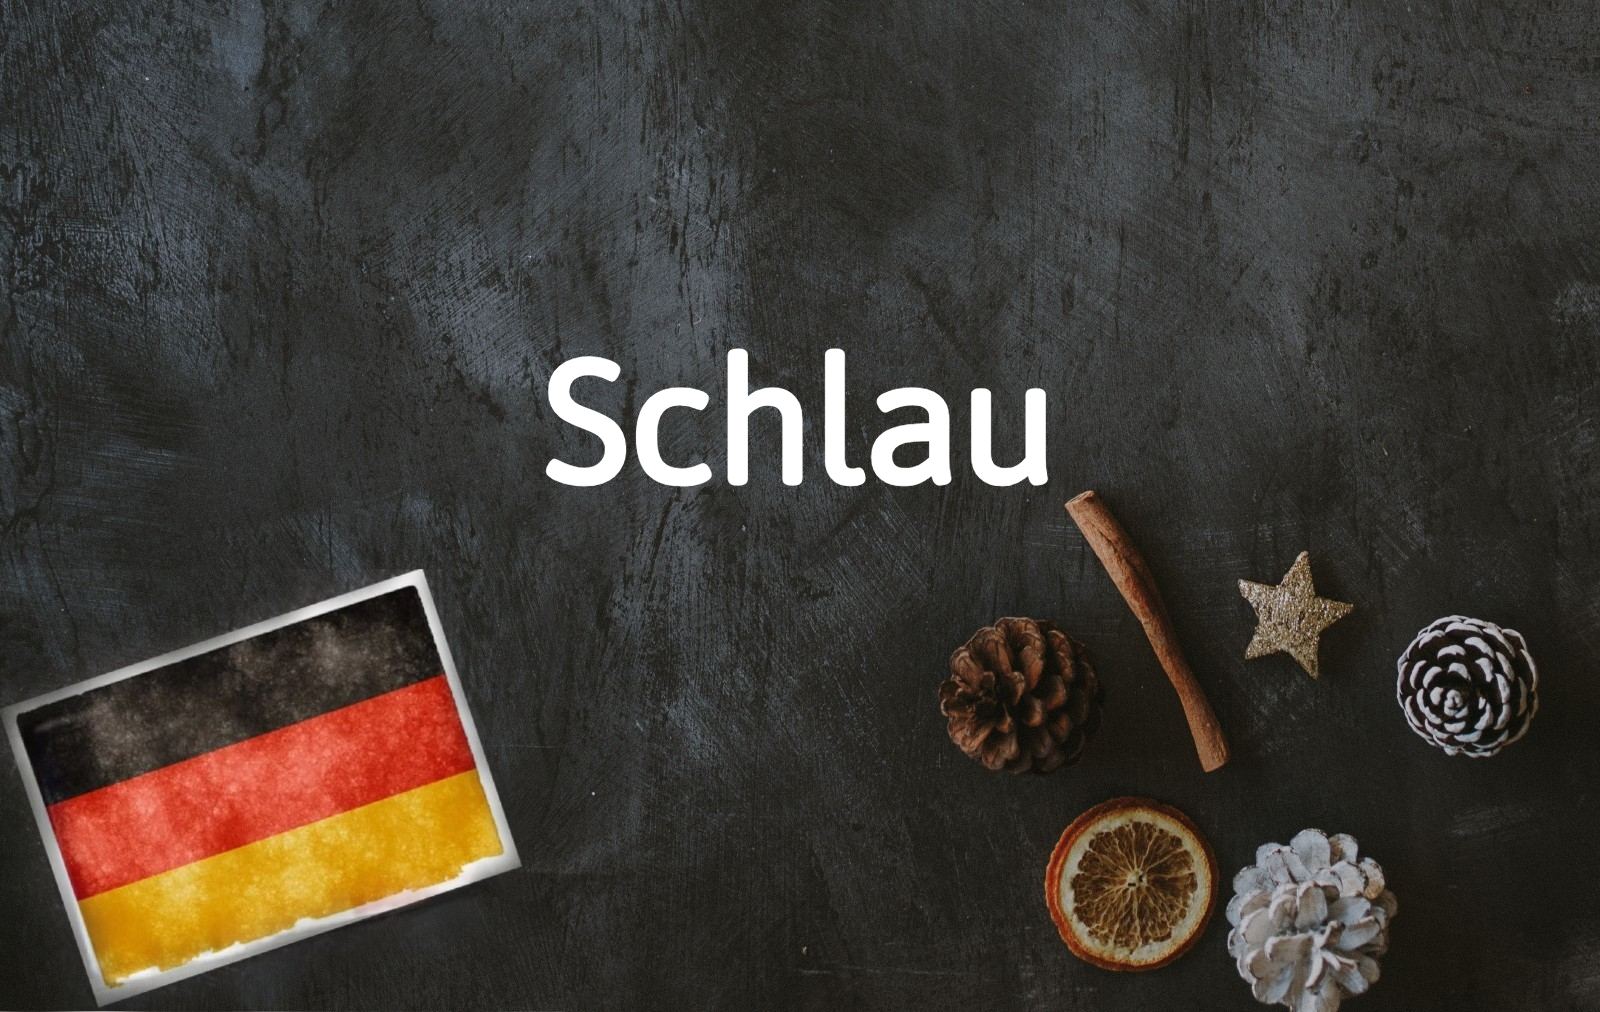 German word of the day: Schlau